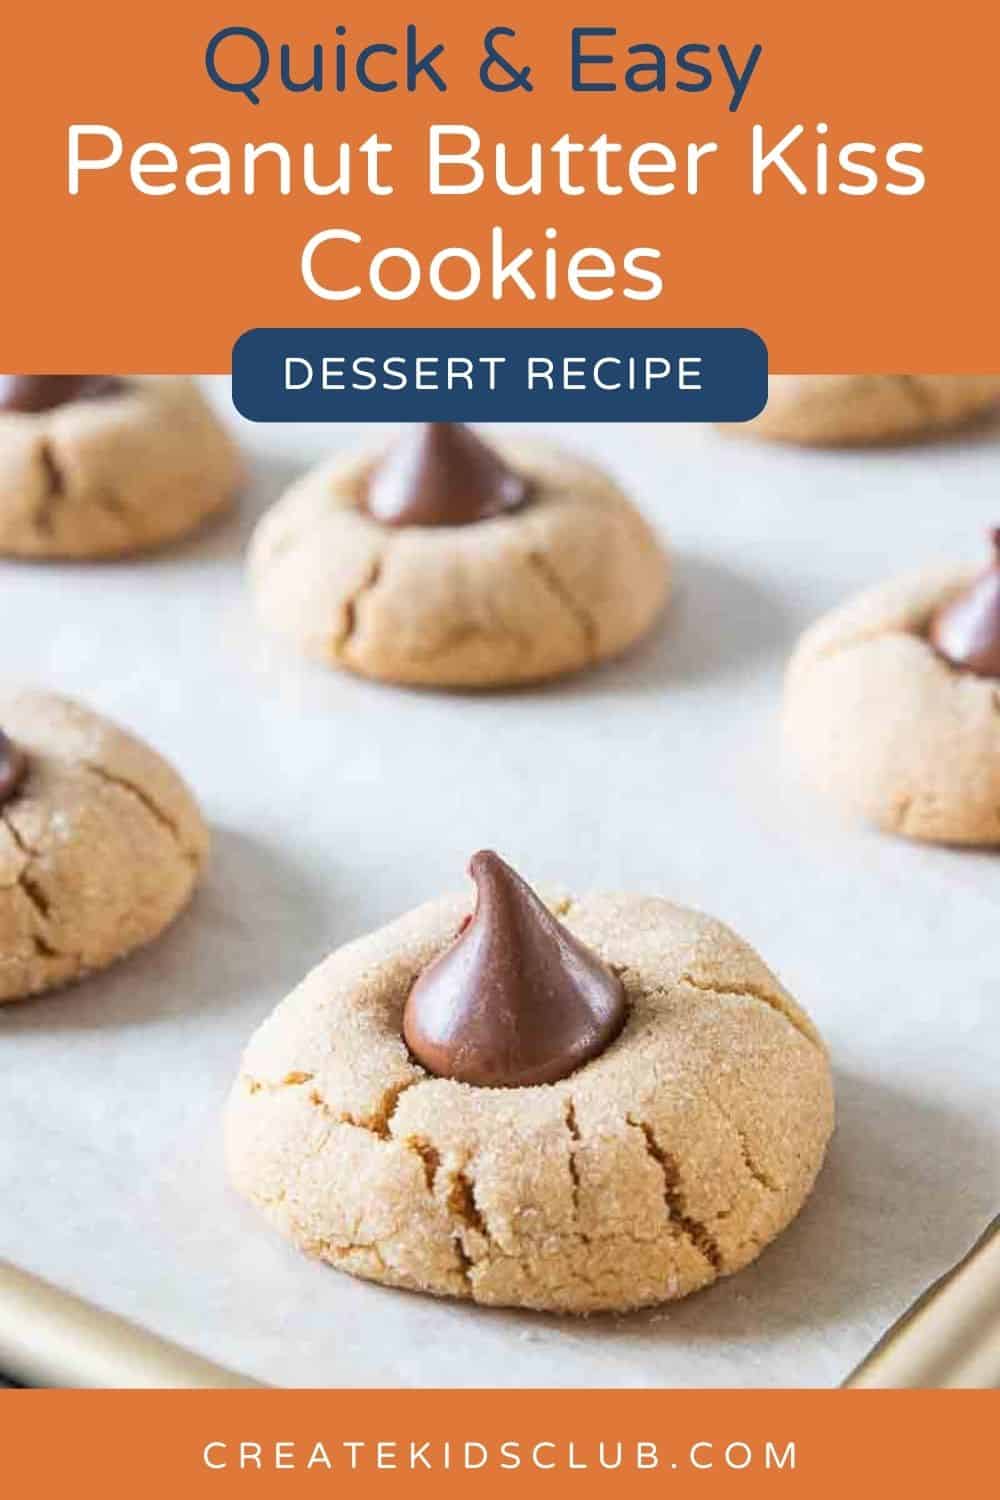 pin of peanut butter blossoms